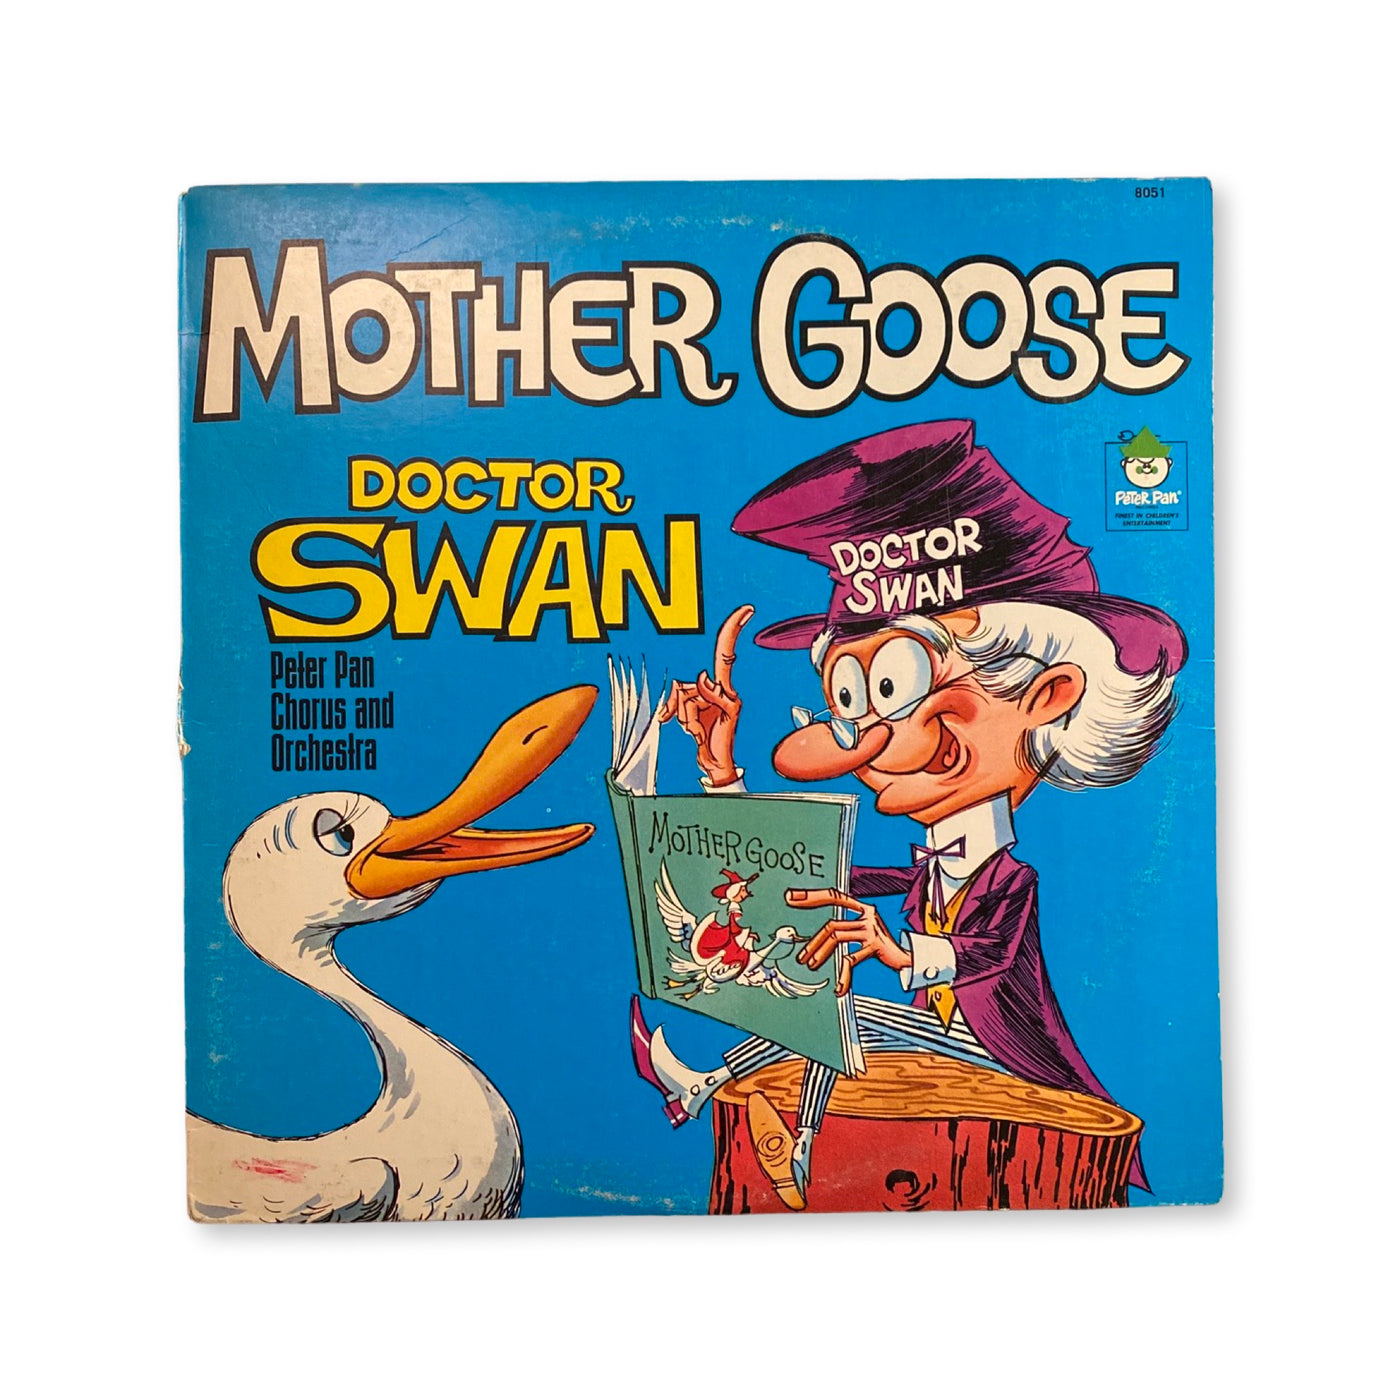 Peter Pan Orchestra And Chorus, Doctor Swan - Mother Goose